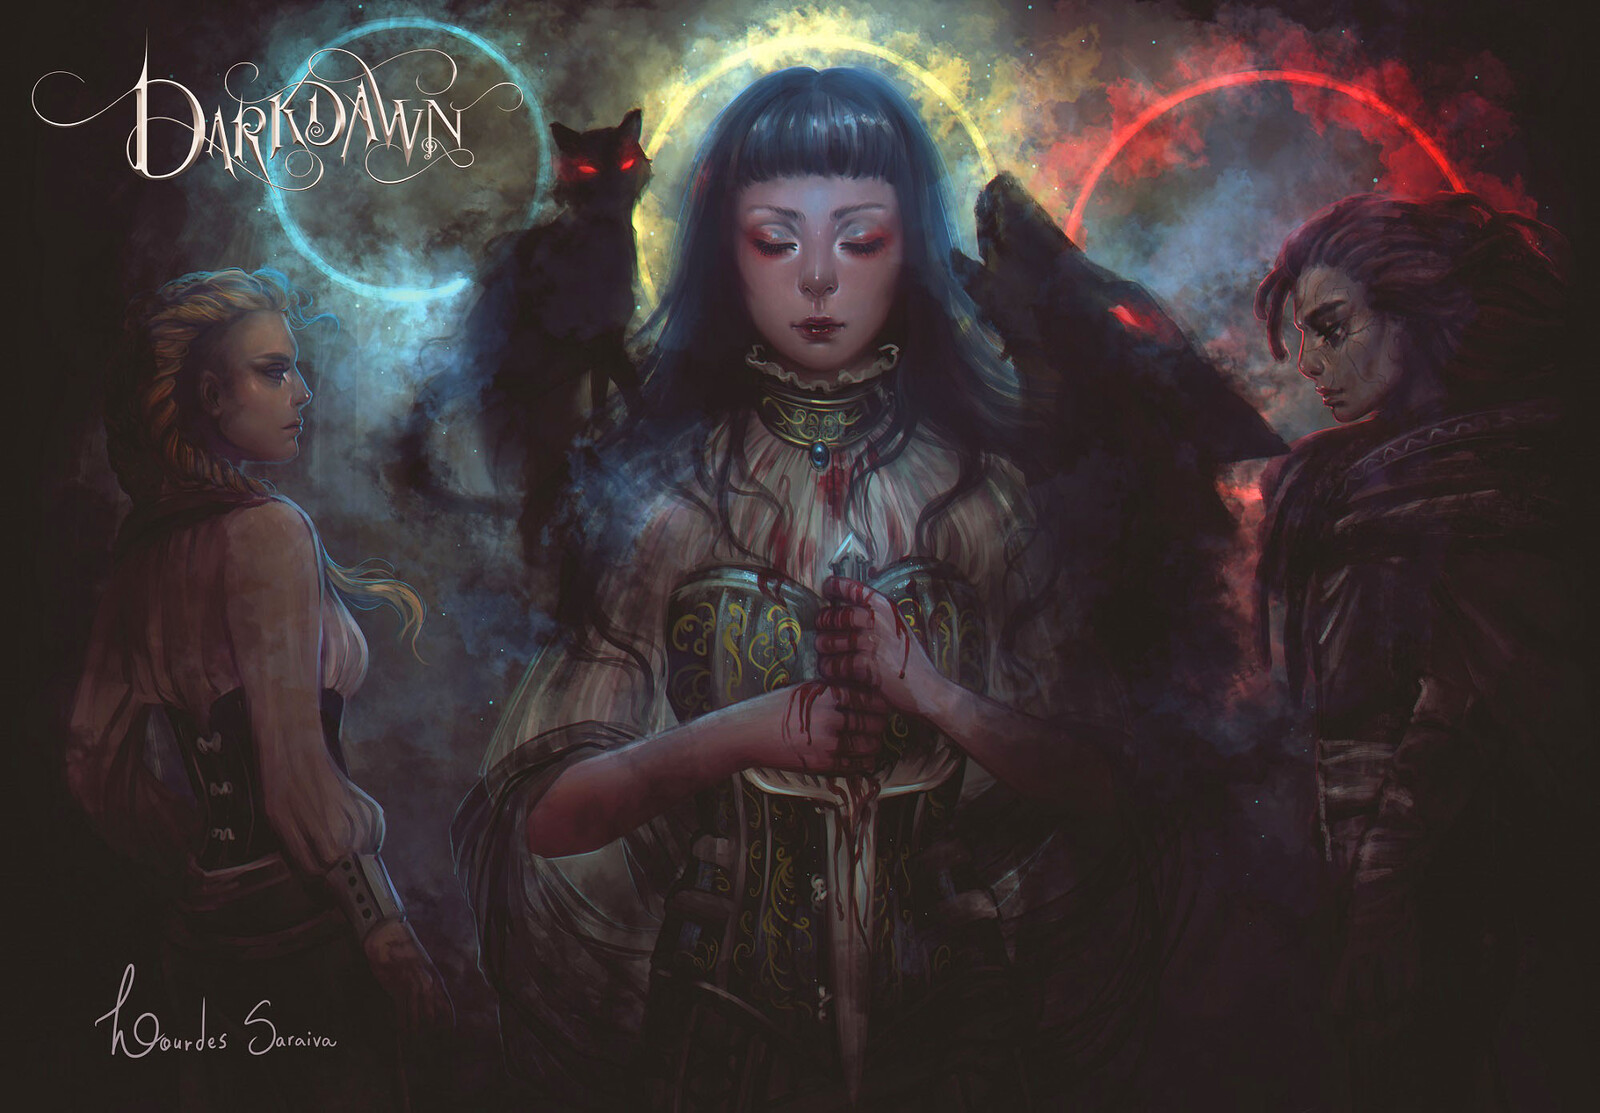 Darkdawn Book Poster Commission for the Presale on Amazon